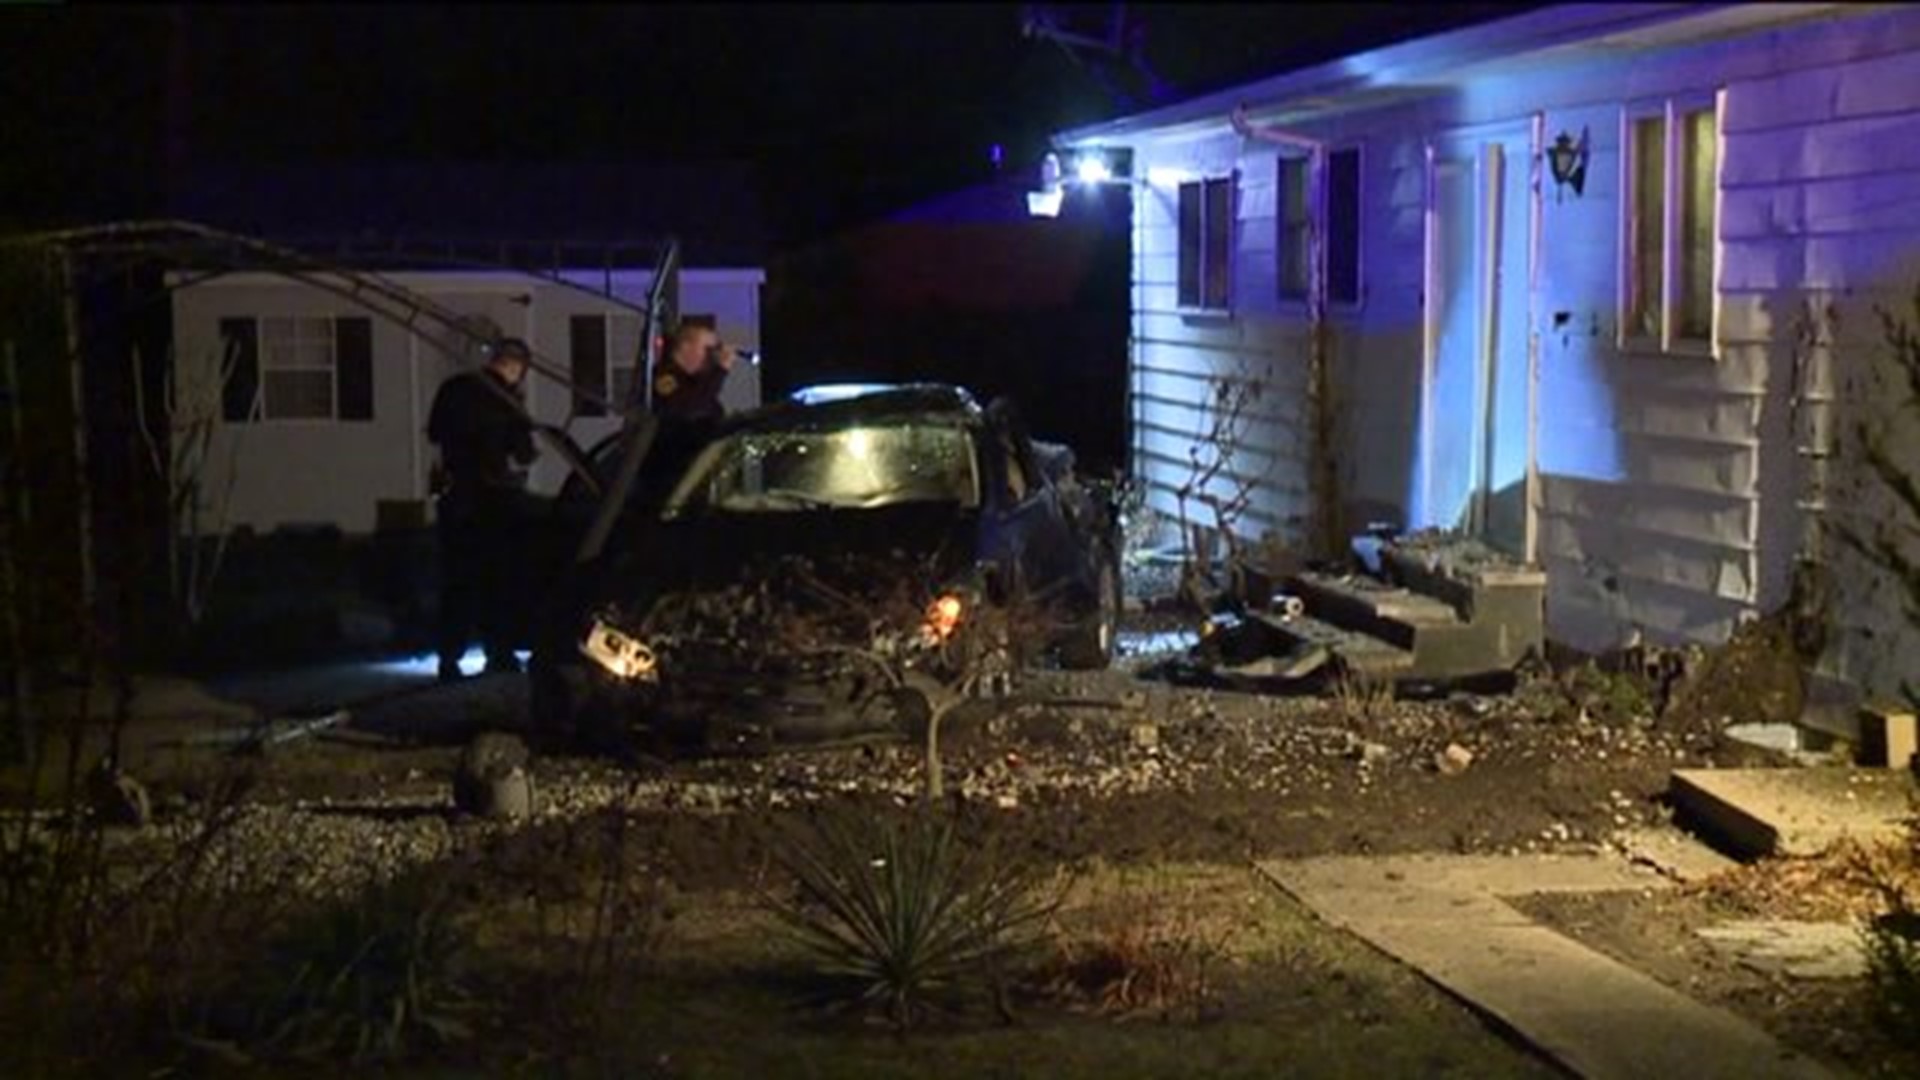 Driver Flees After Smashing into Home in Scranton